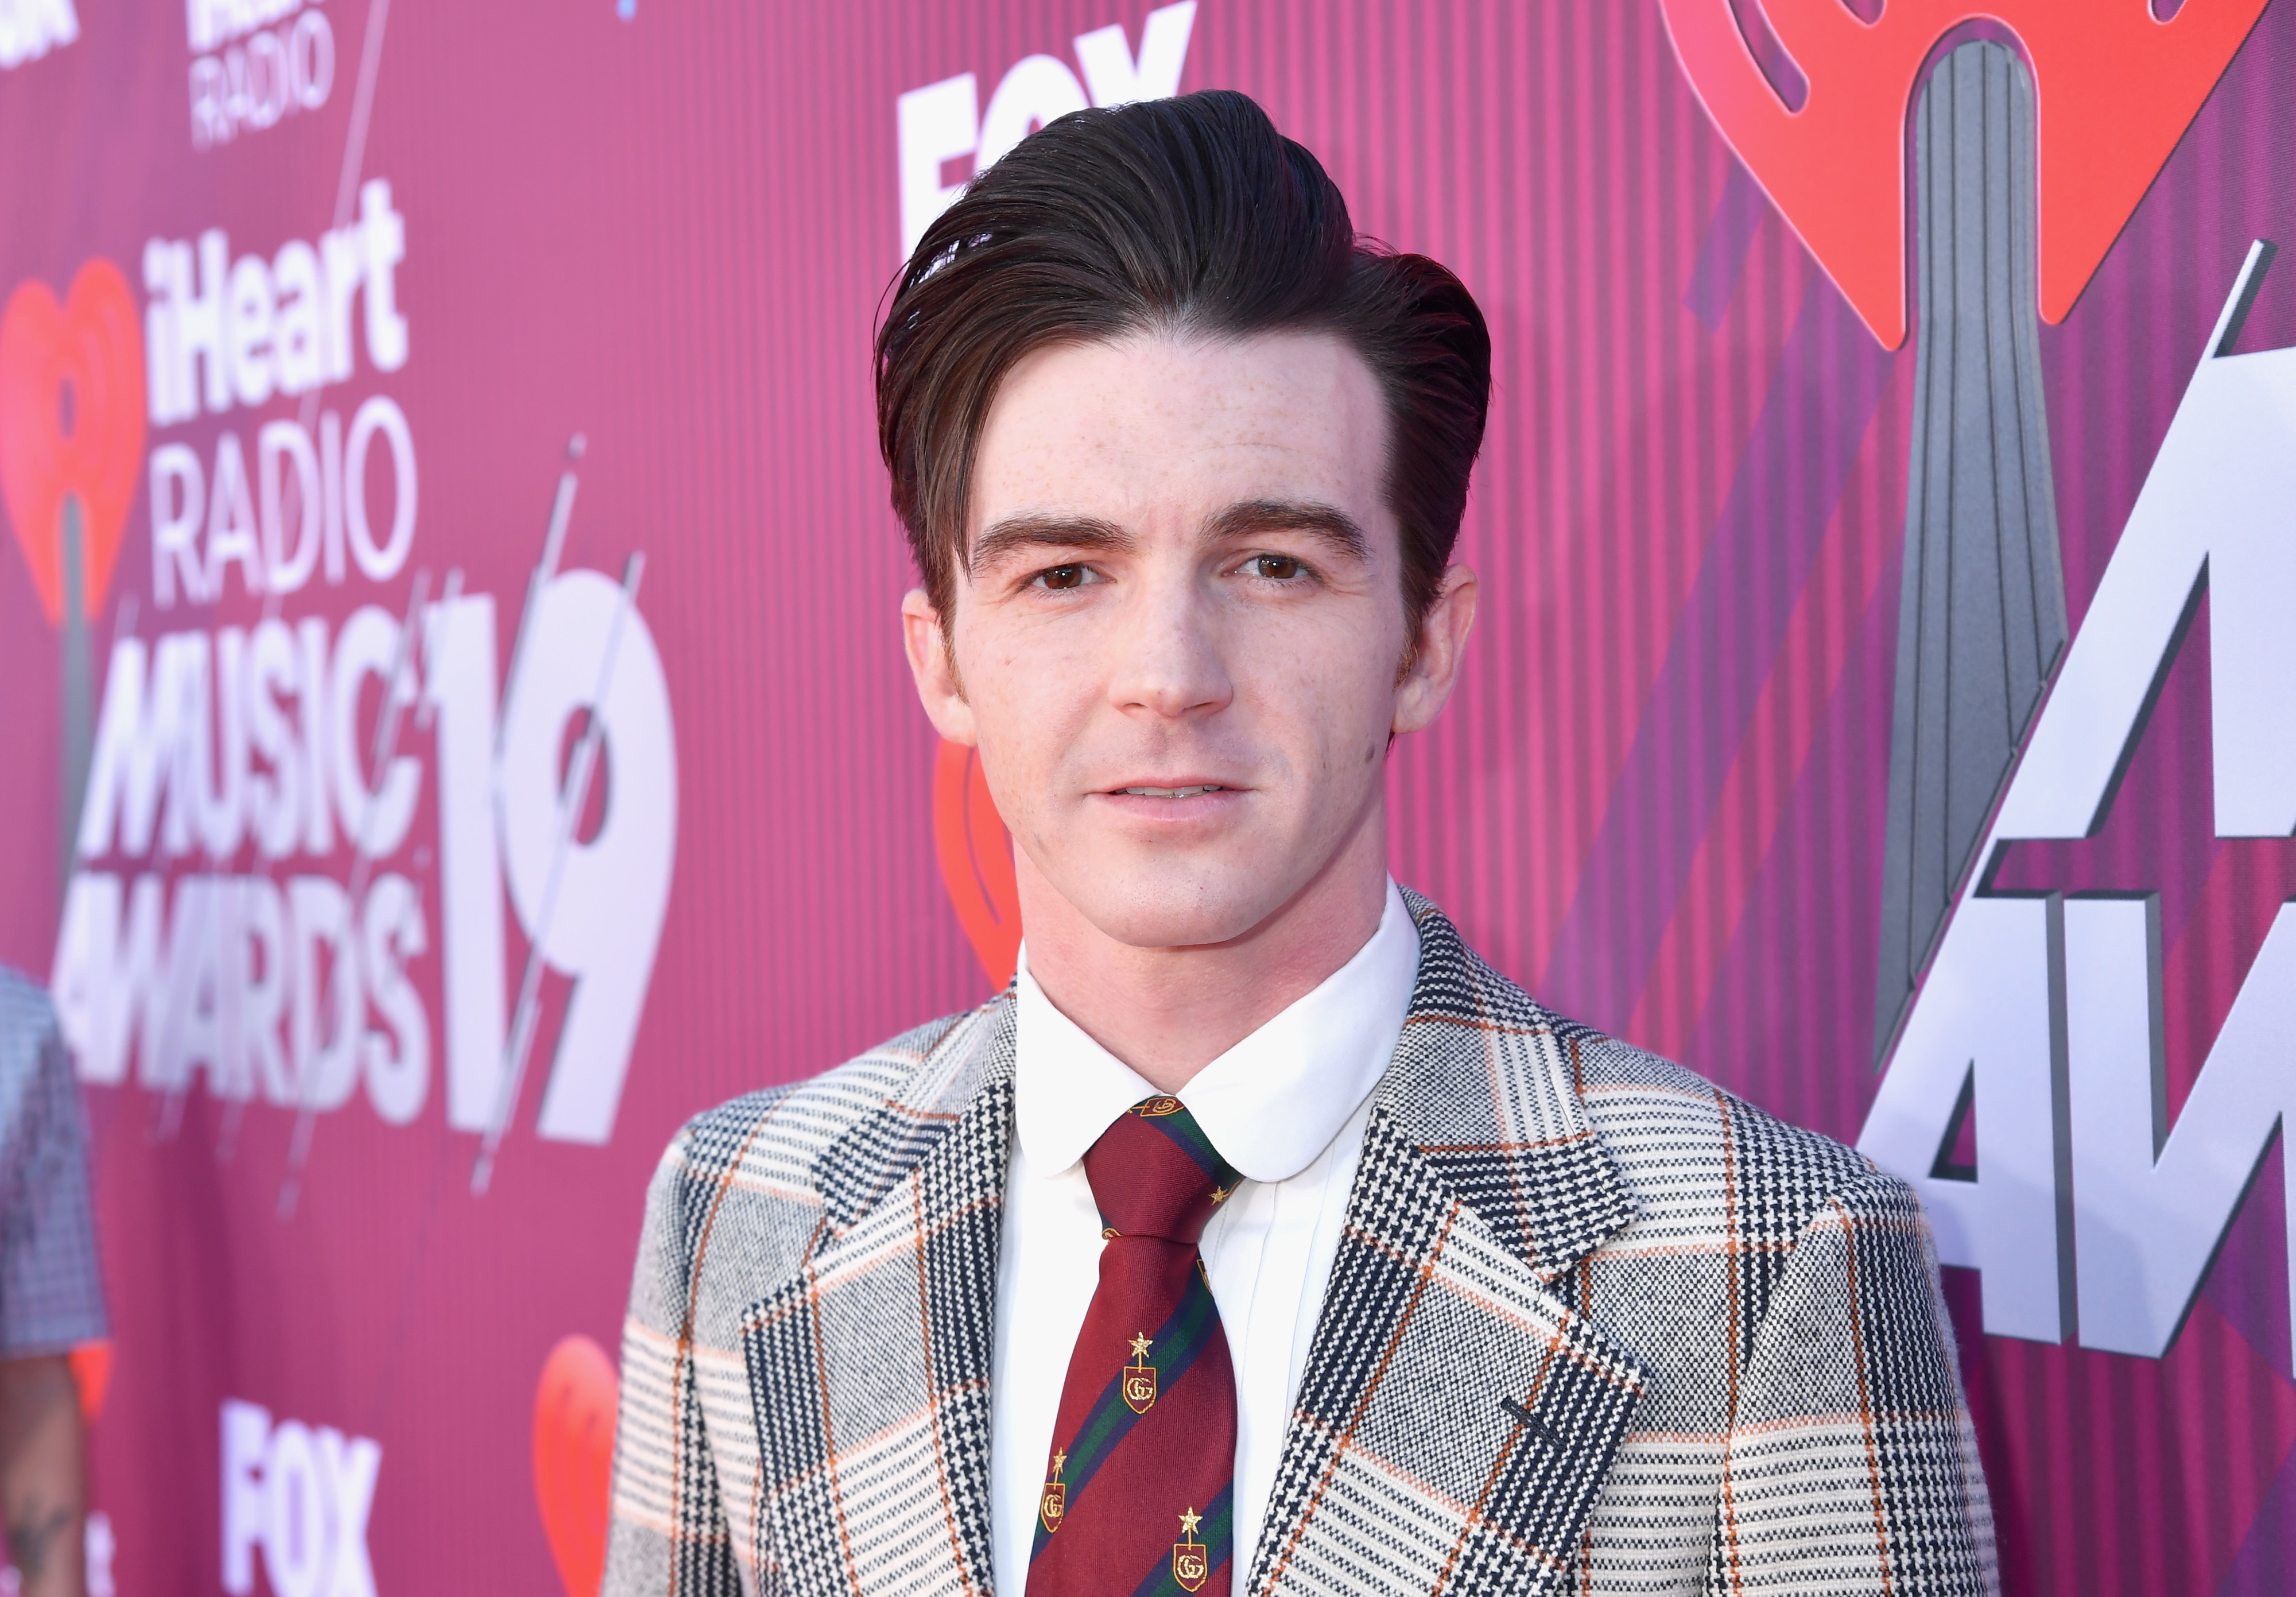 Drake Bell in a patterned suit poses at iHeartRadio Music Awards